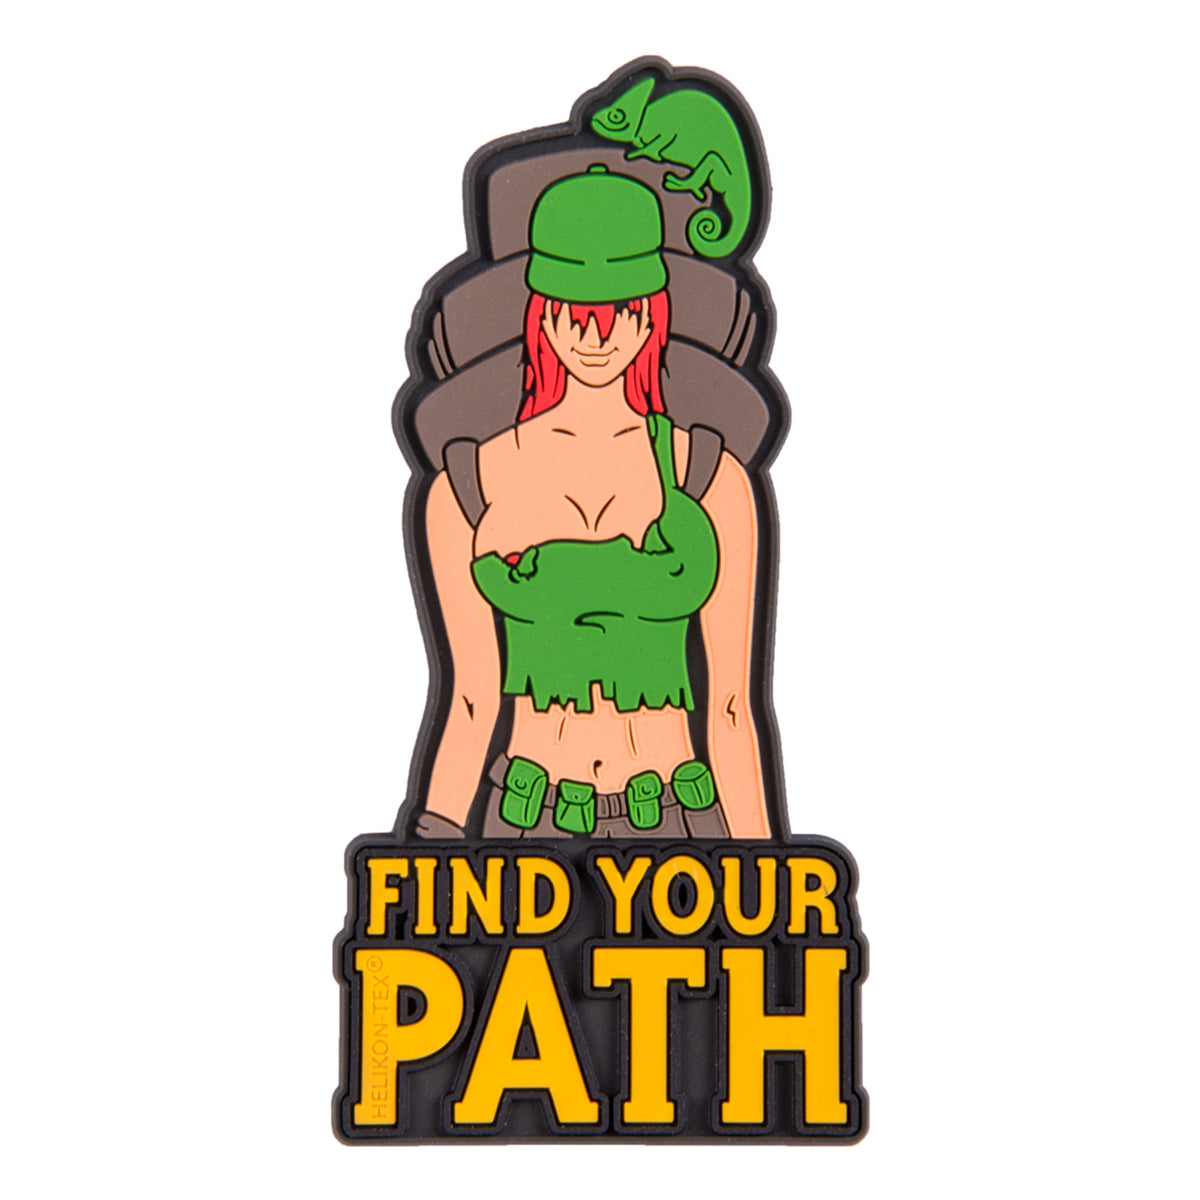 Patch find your path di HELIKON-TEX su backpacco.it